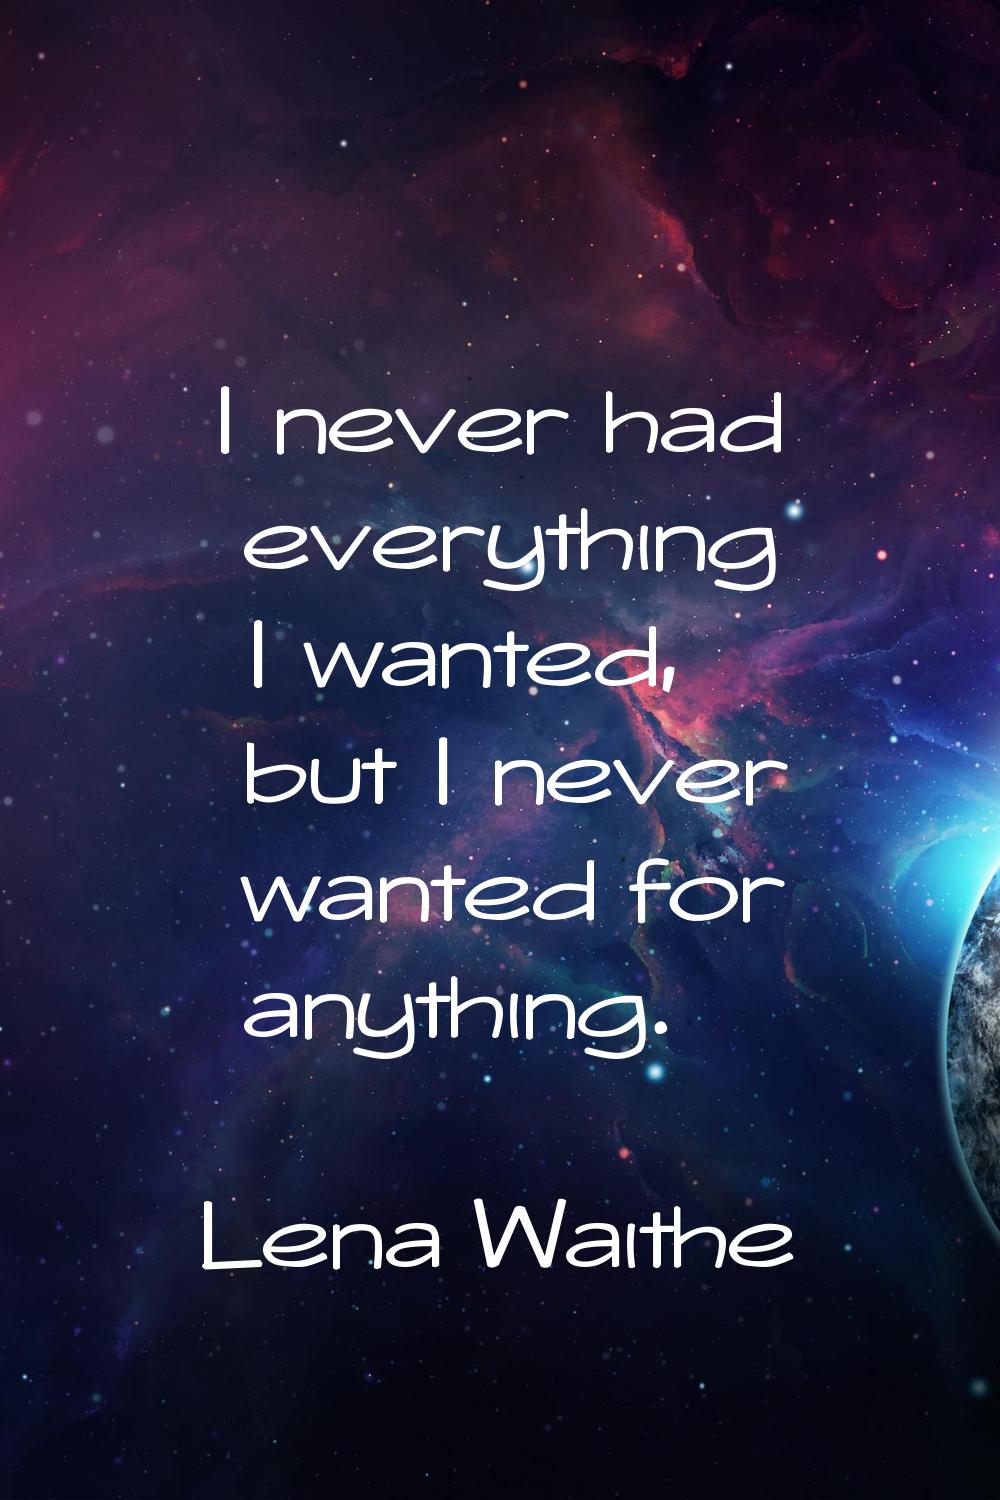 I never had everything I wanted, but I never wanted for anything.